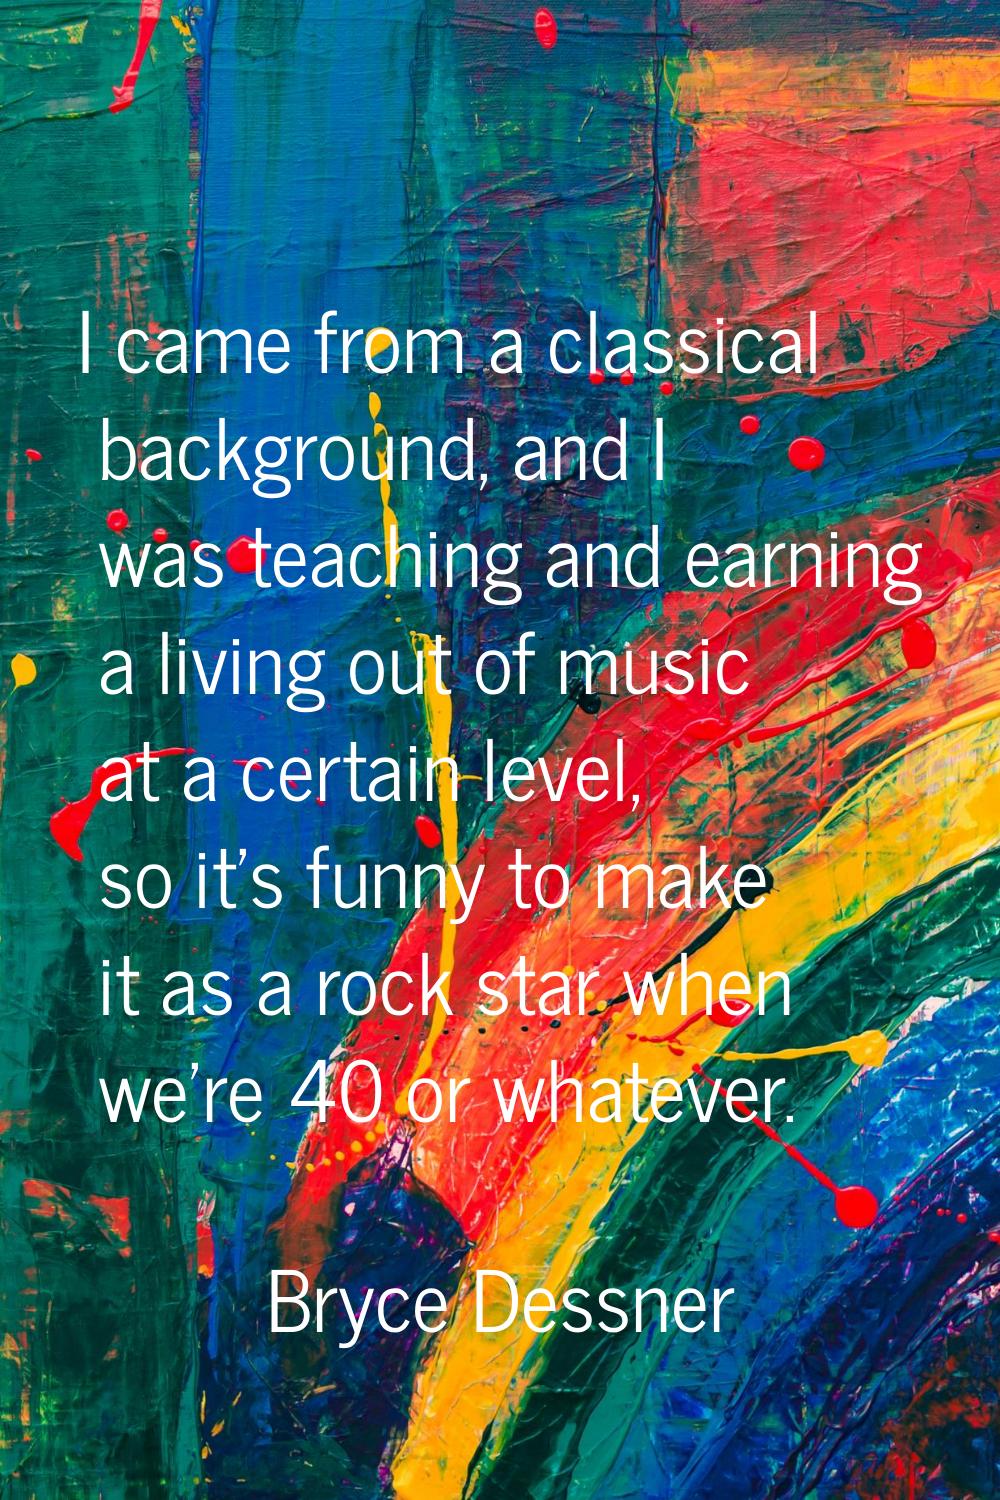 I came from a classical background, and I was teaching and earning a living out of music at a certa